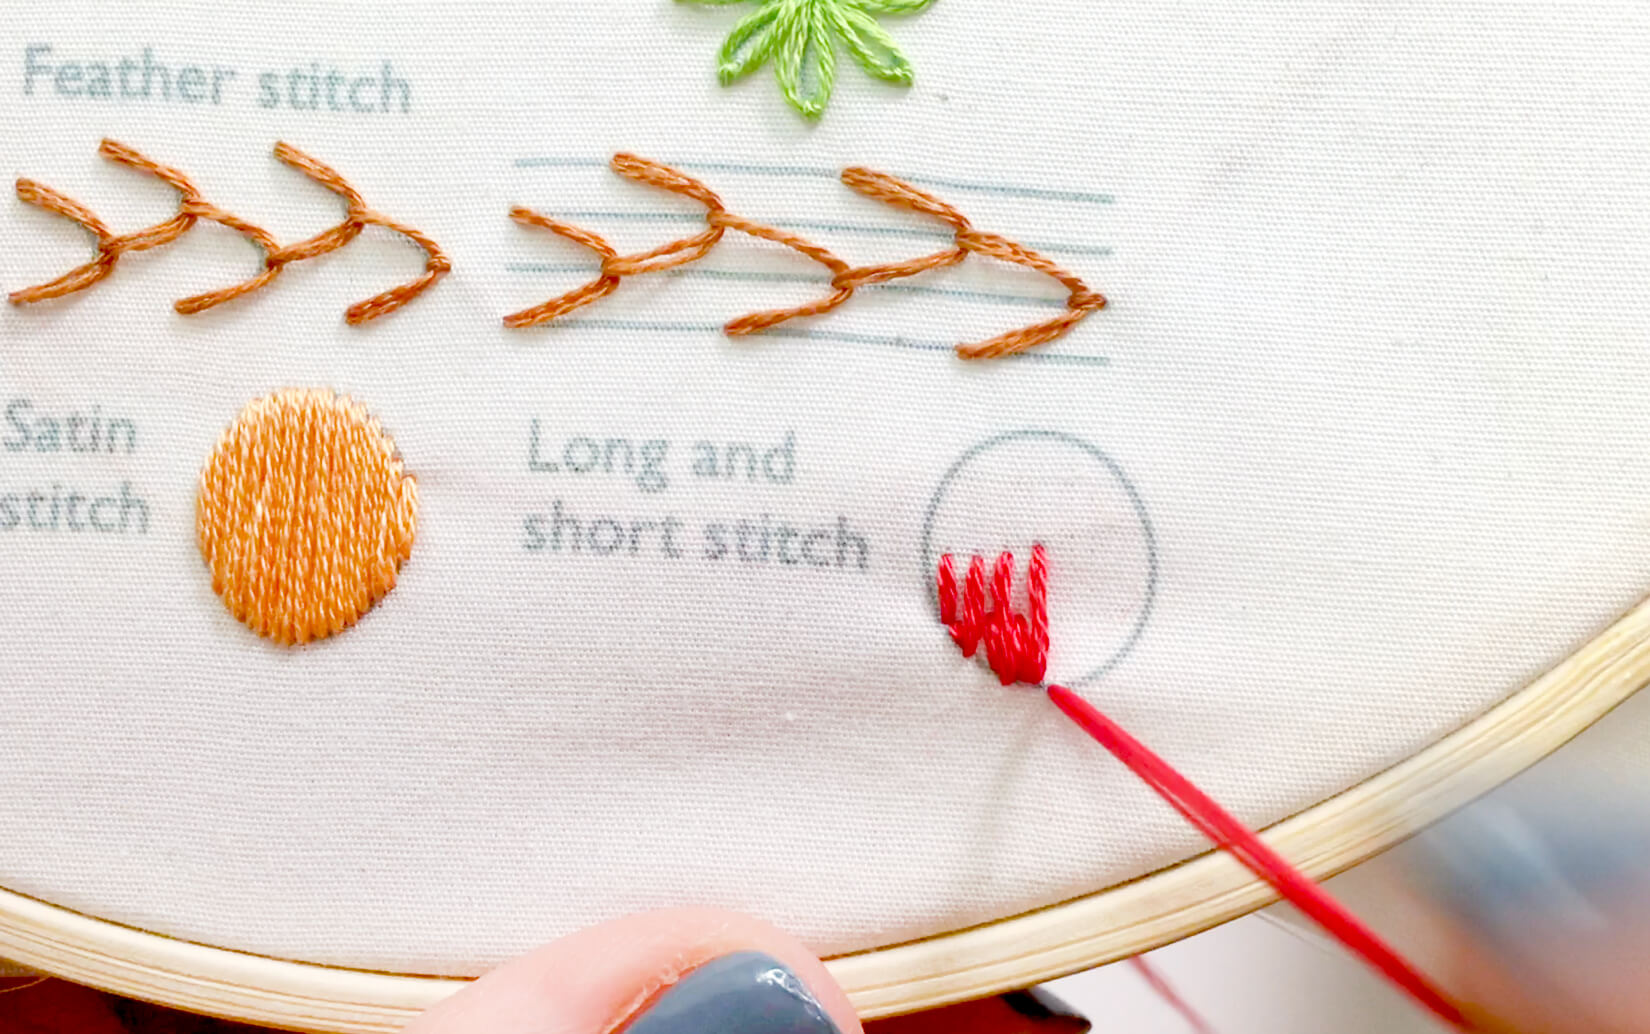 Image of stitching the long and short stitch